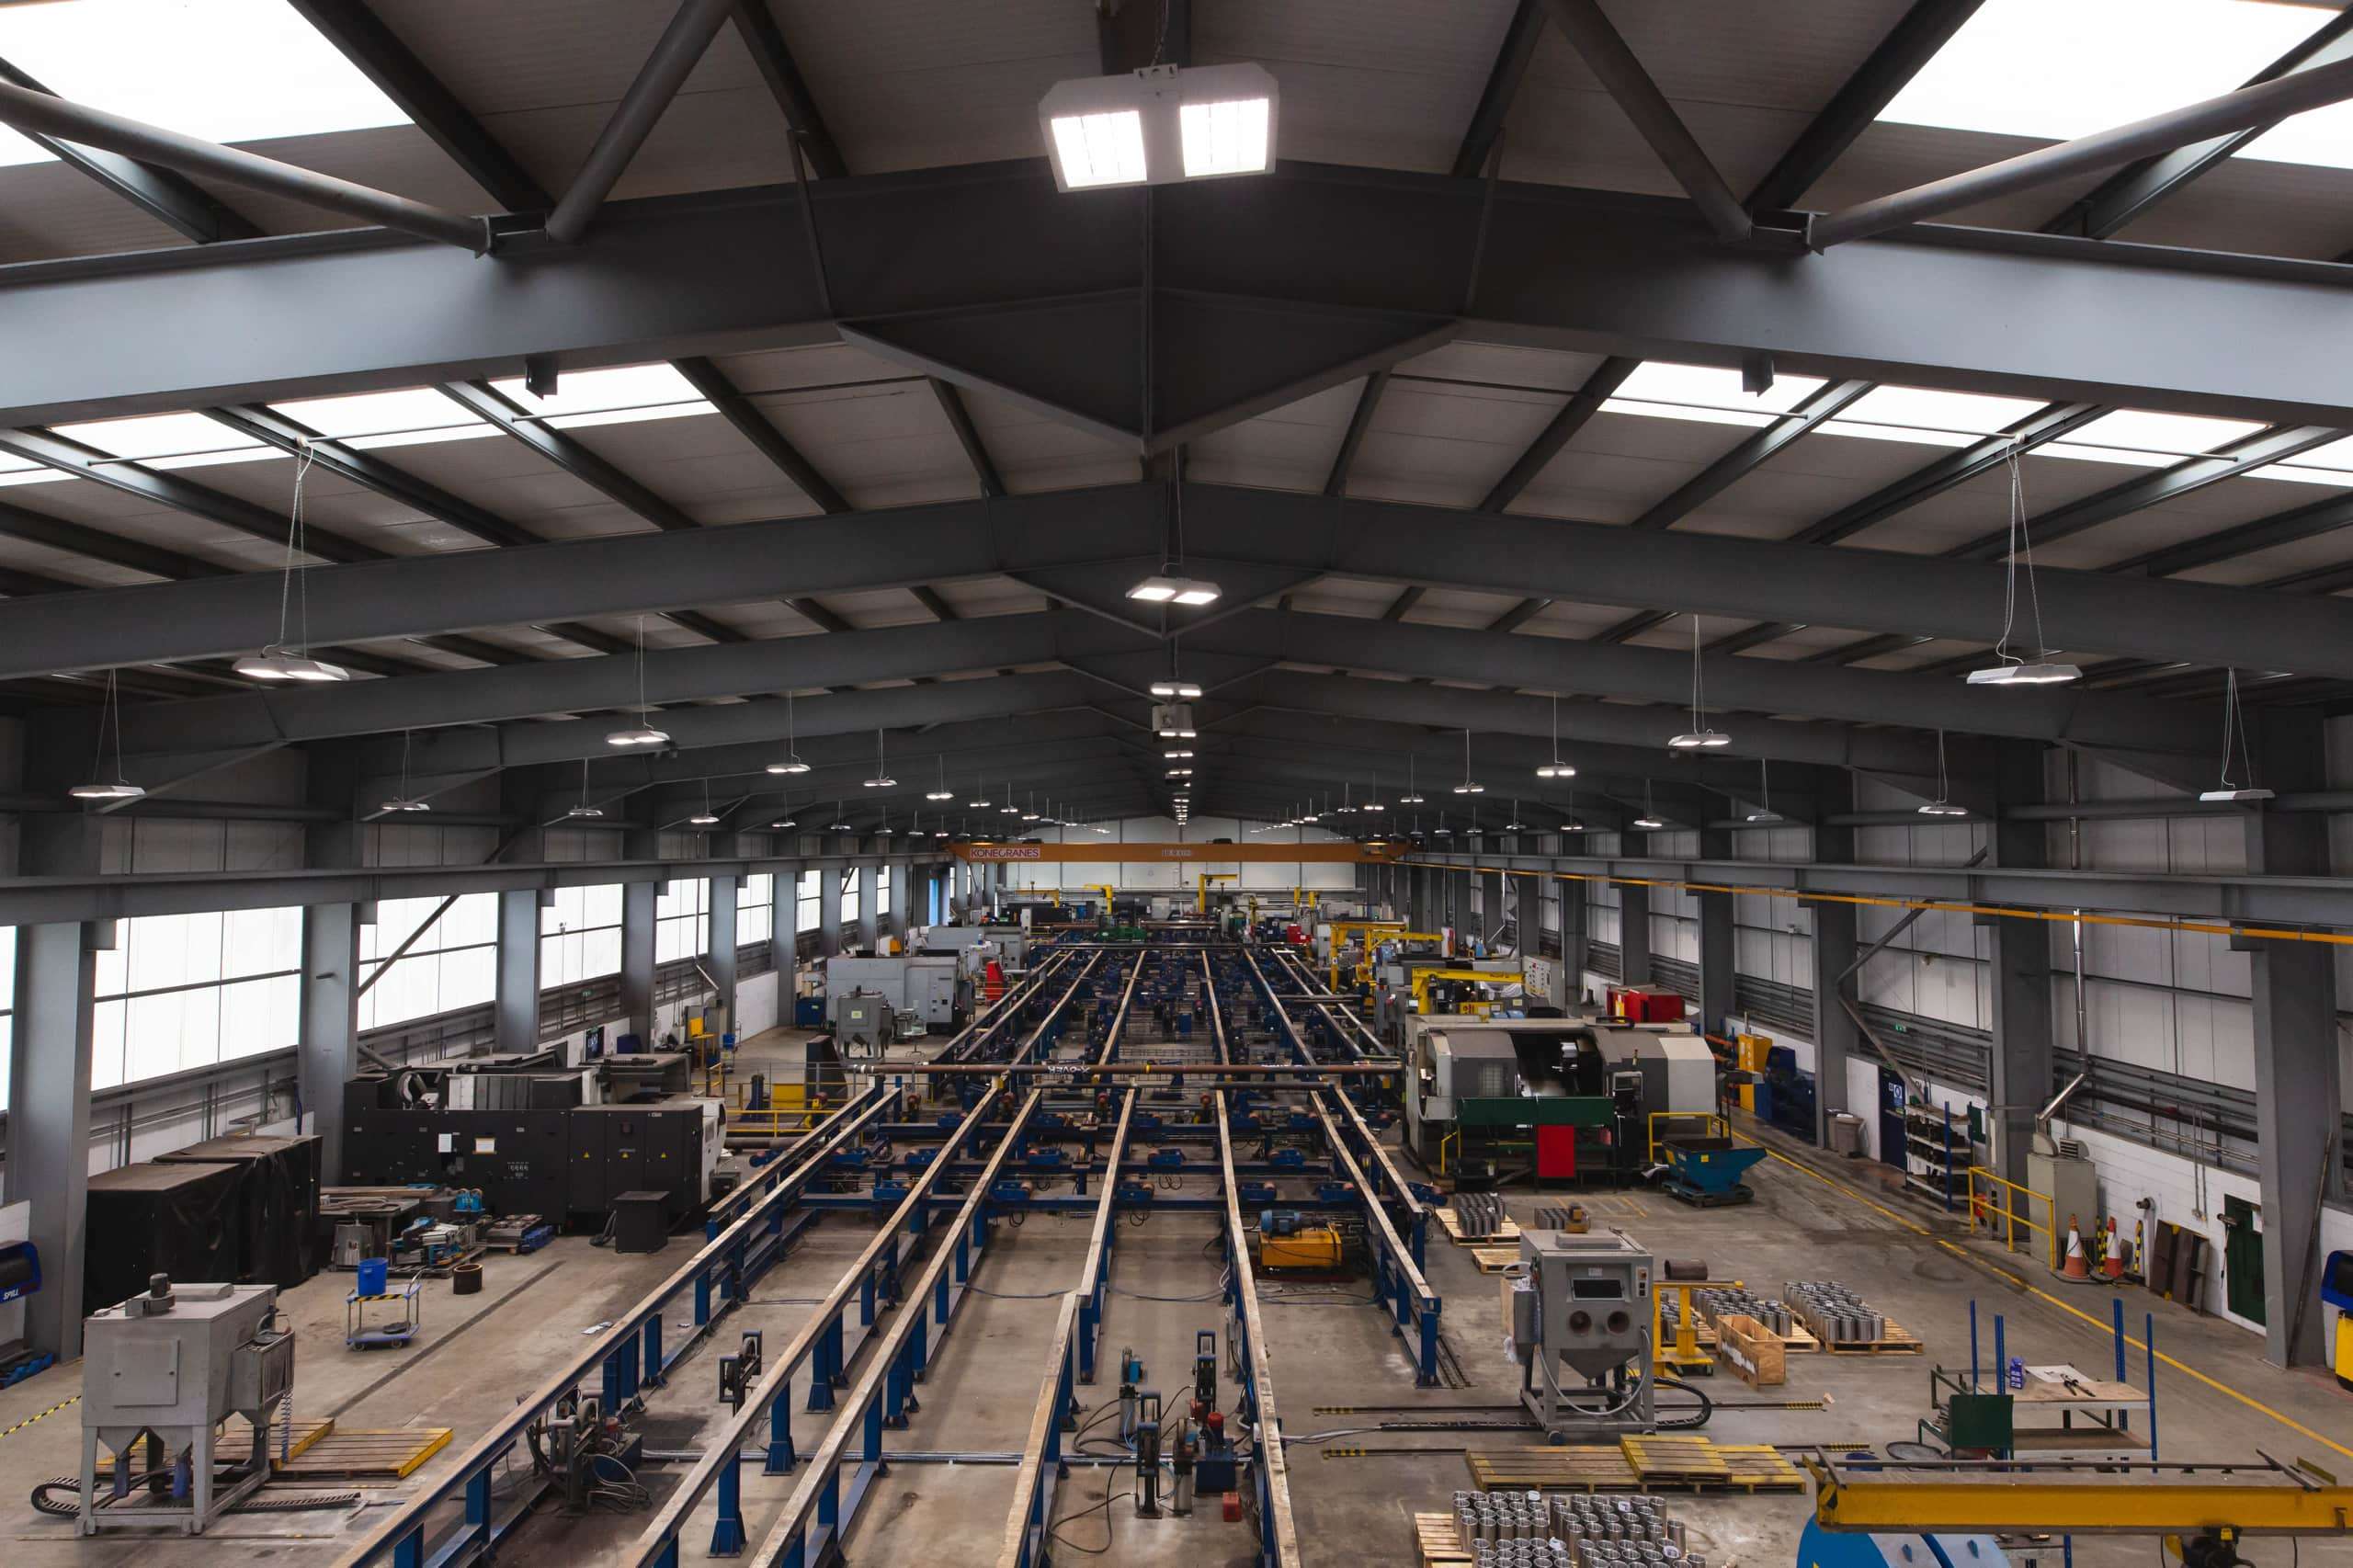 Wide angle shot of the inside of a pipe construction facility